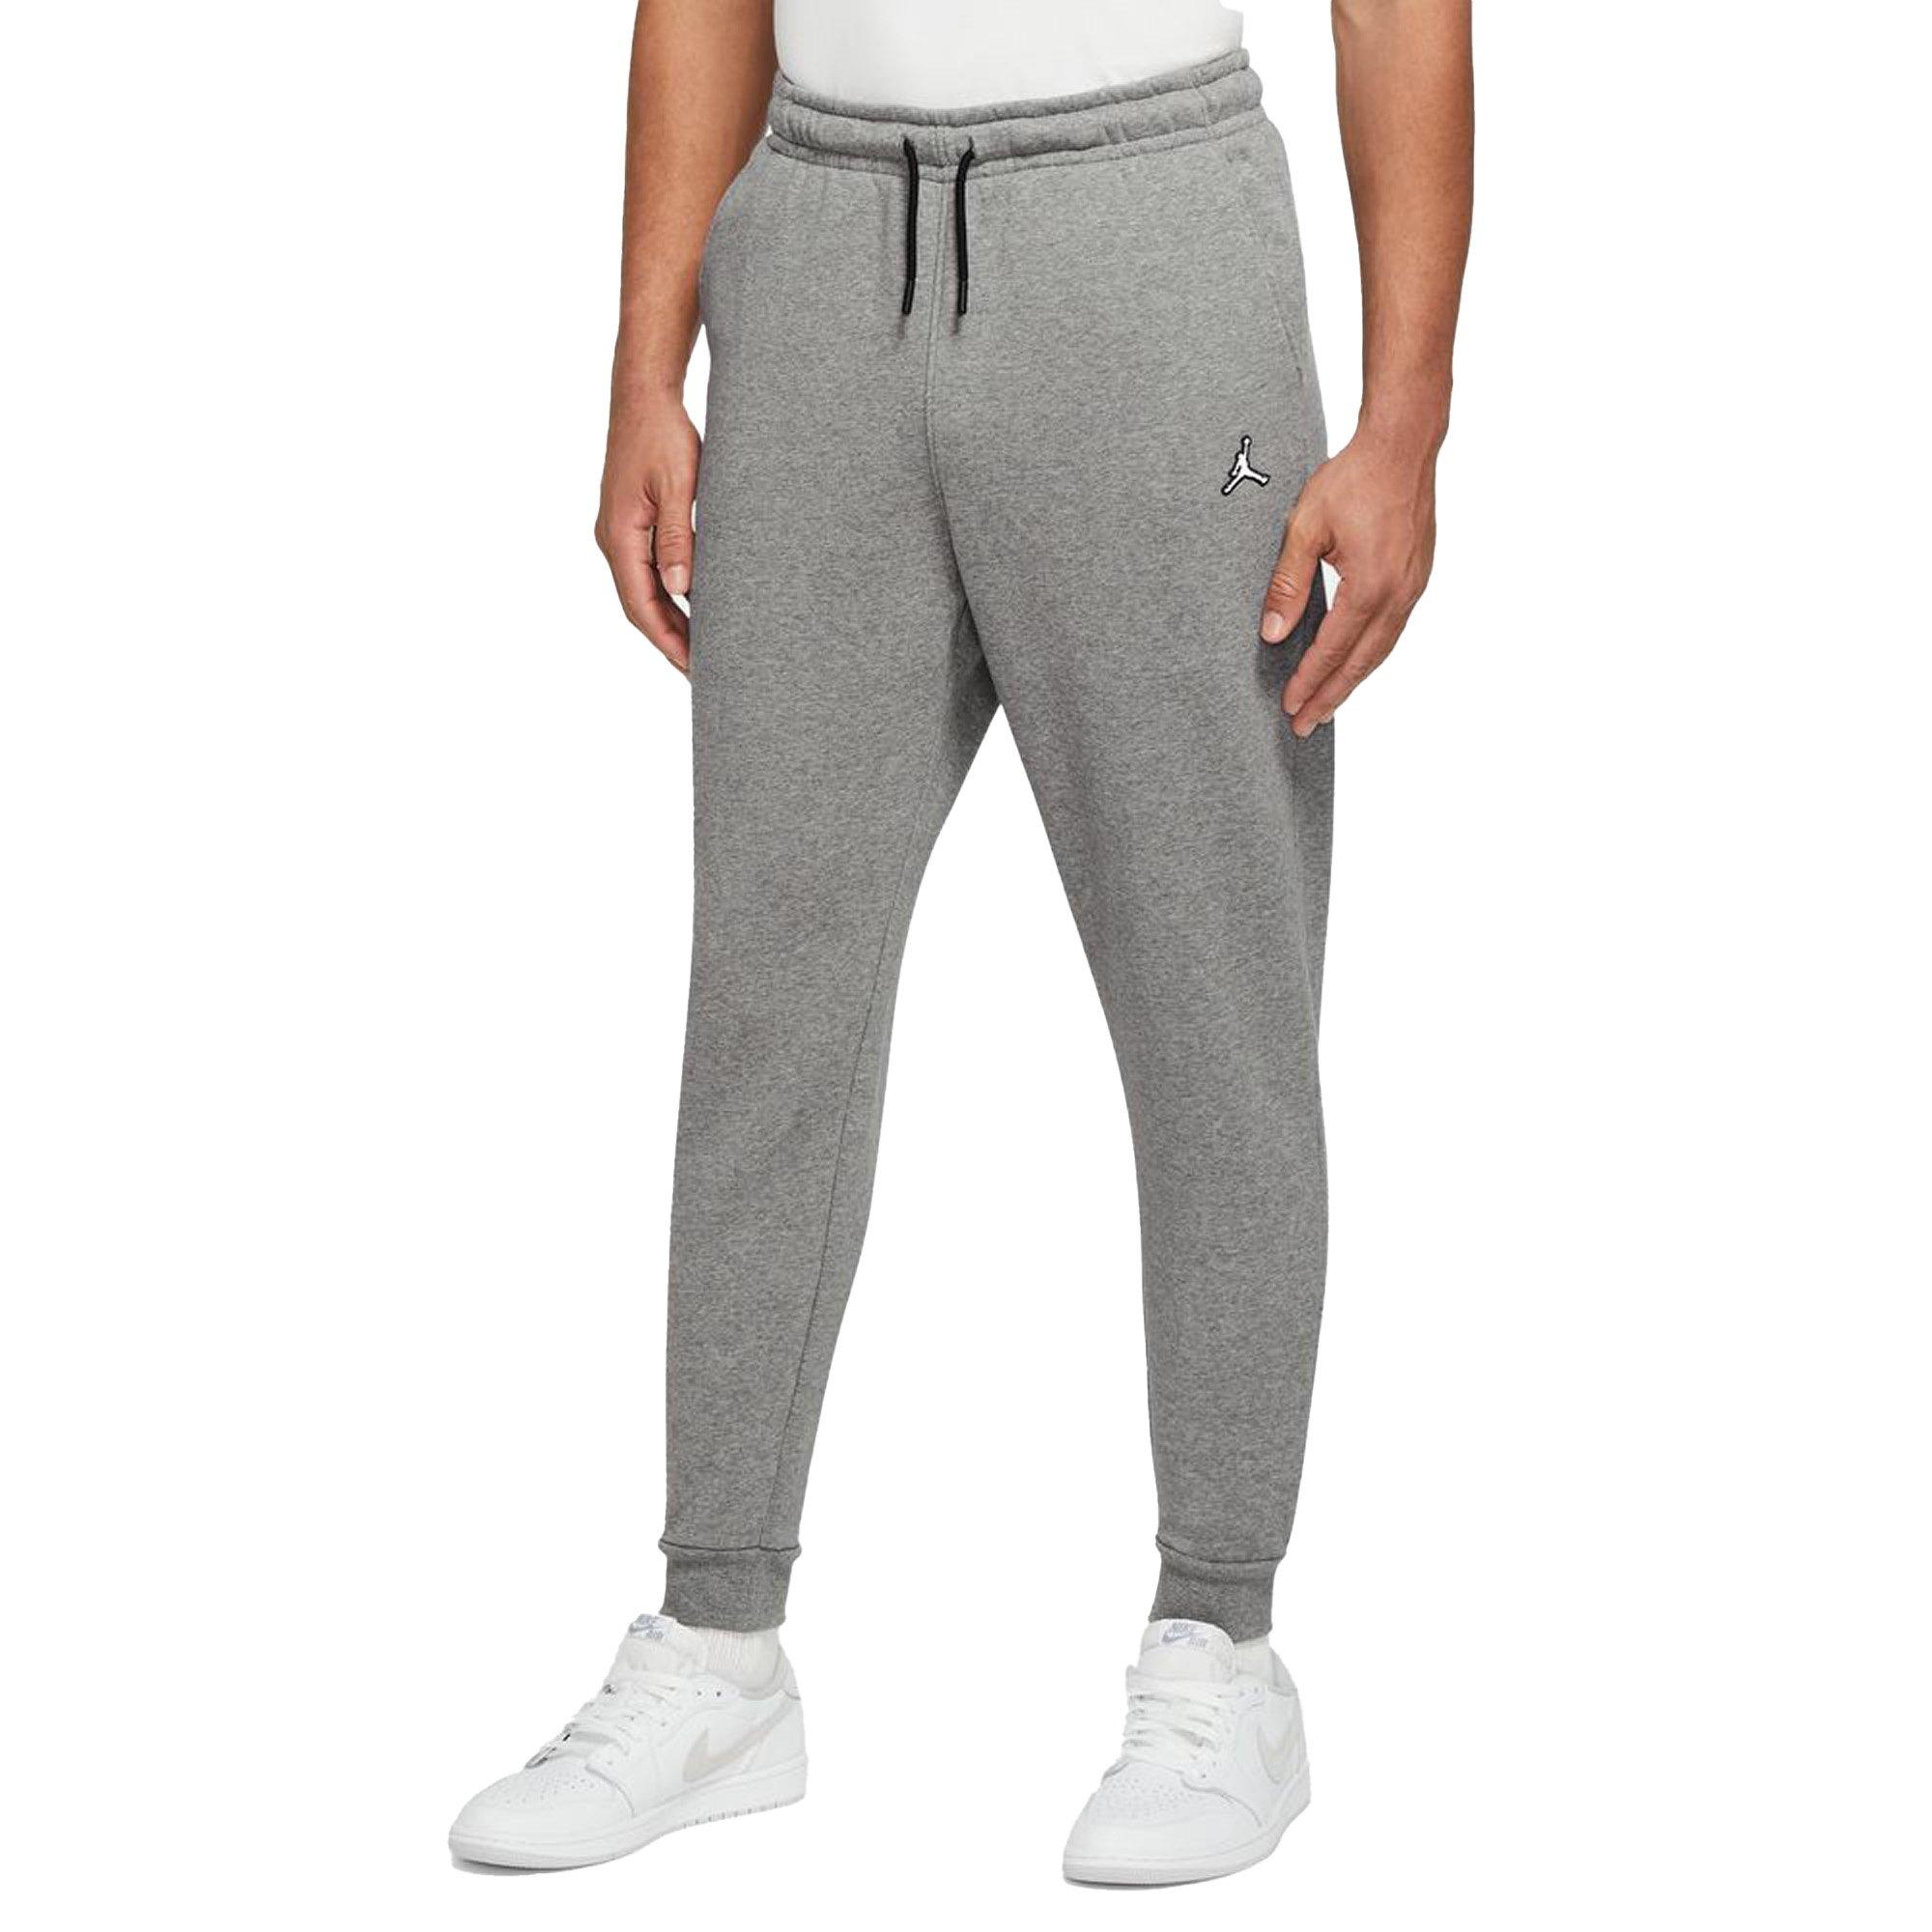 NWT Under Armour women's joggers. Made in Jordan. 100% polyester